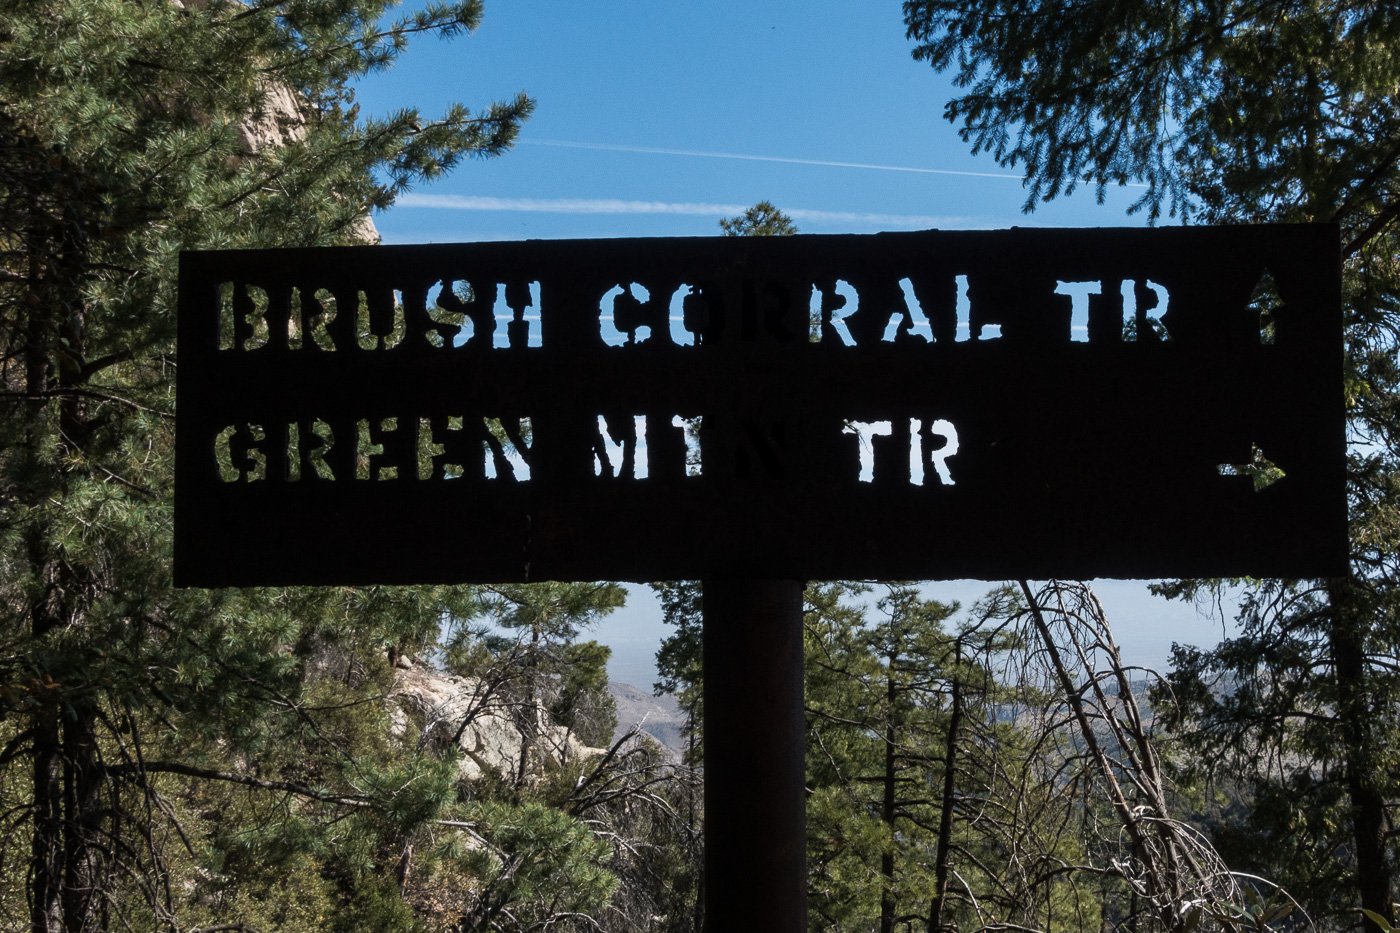 At the junction of the Brush Corral and Green Mountain Trails. April 2017.